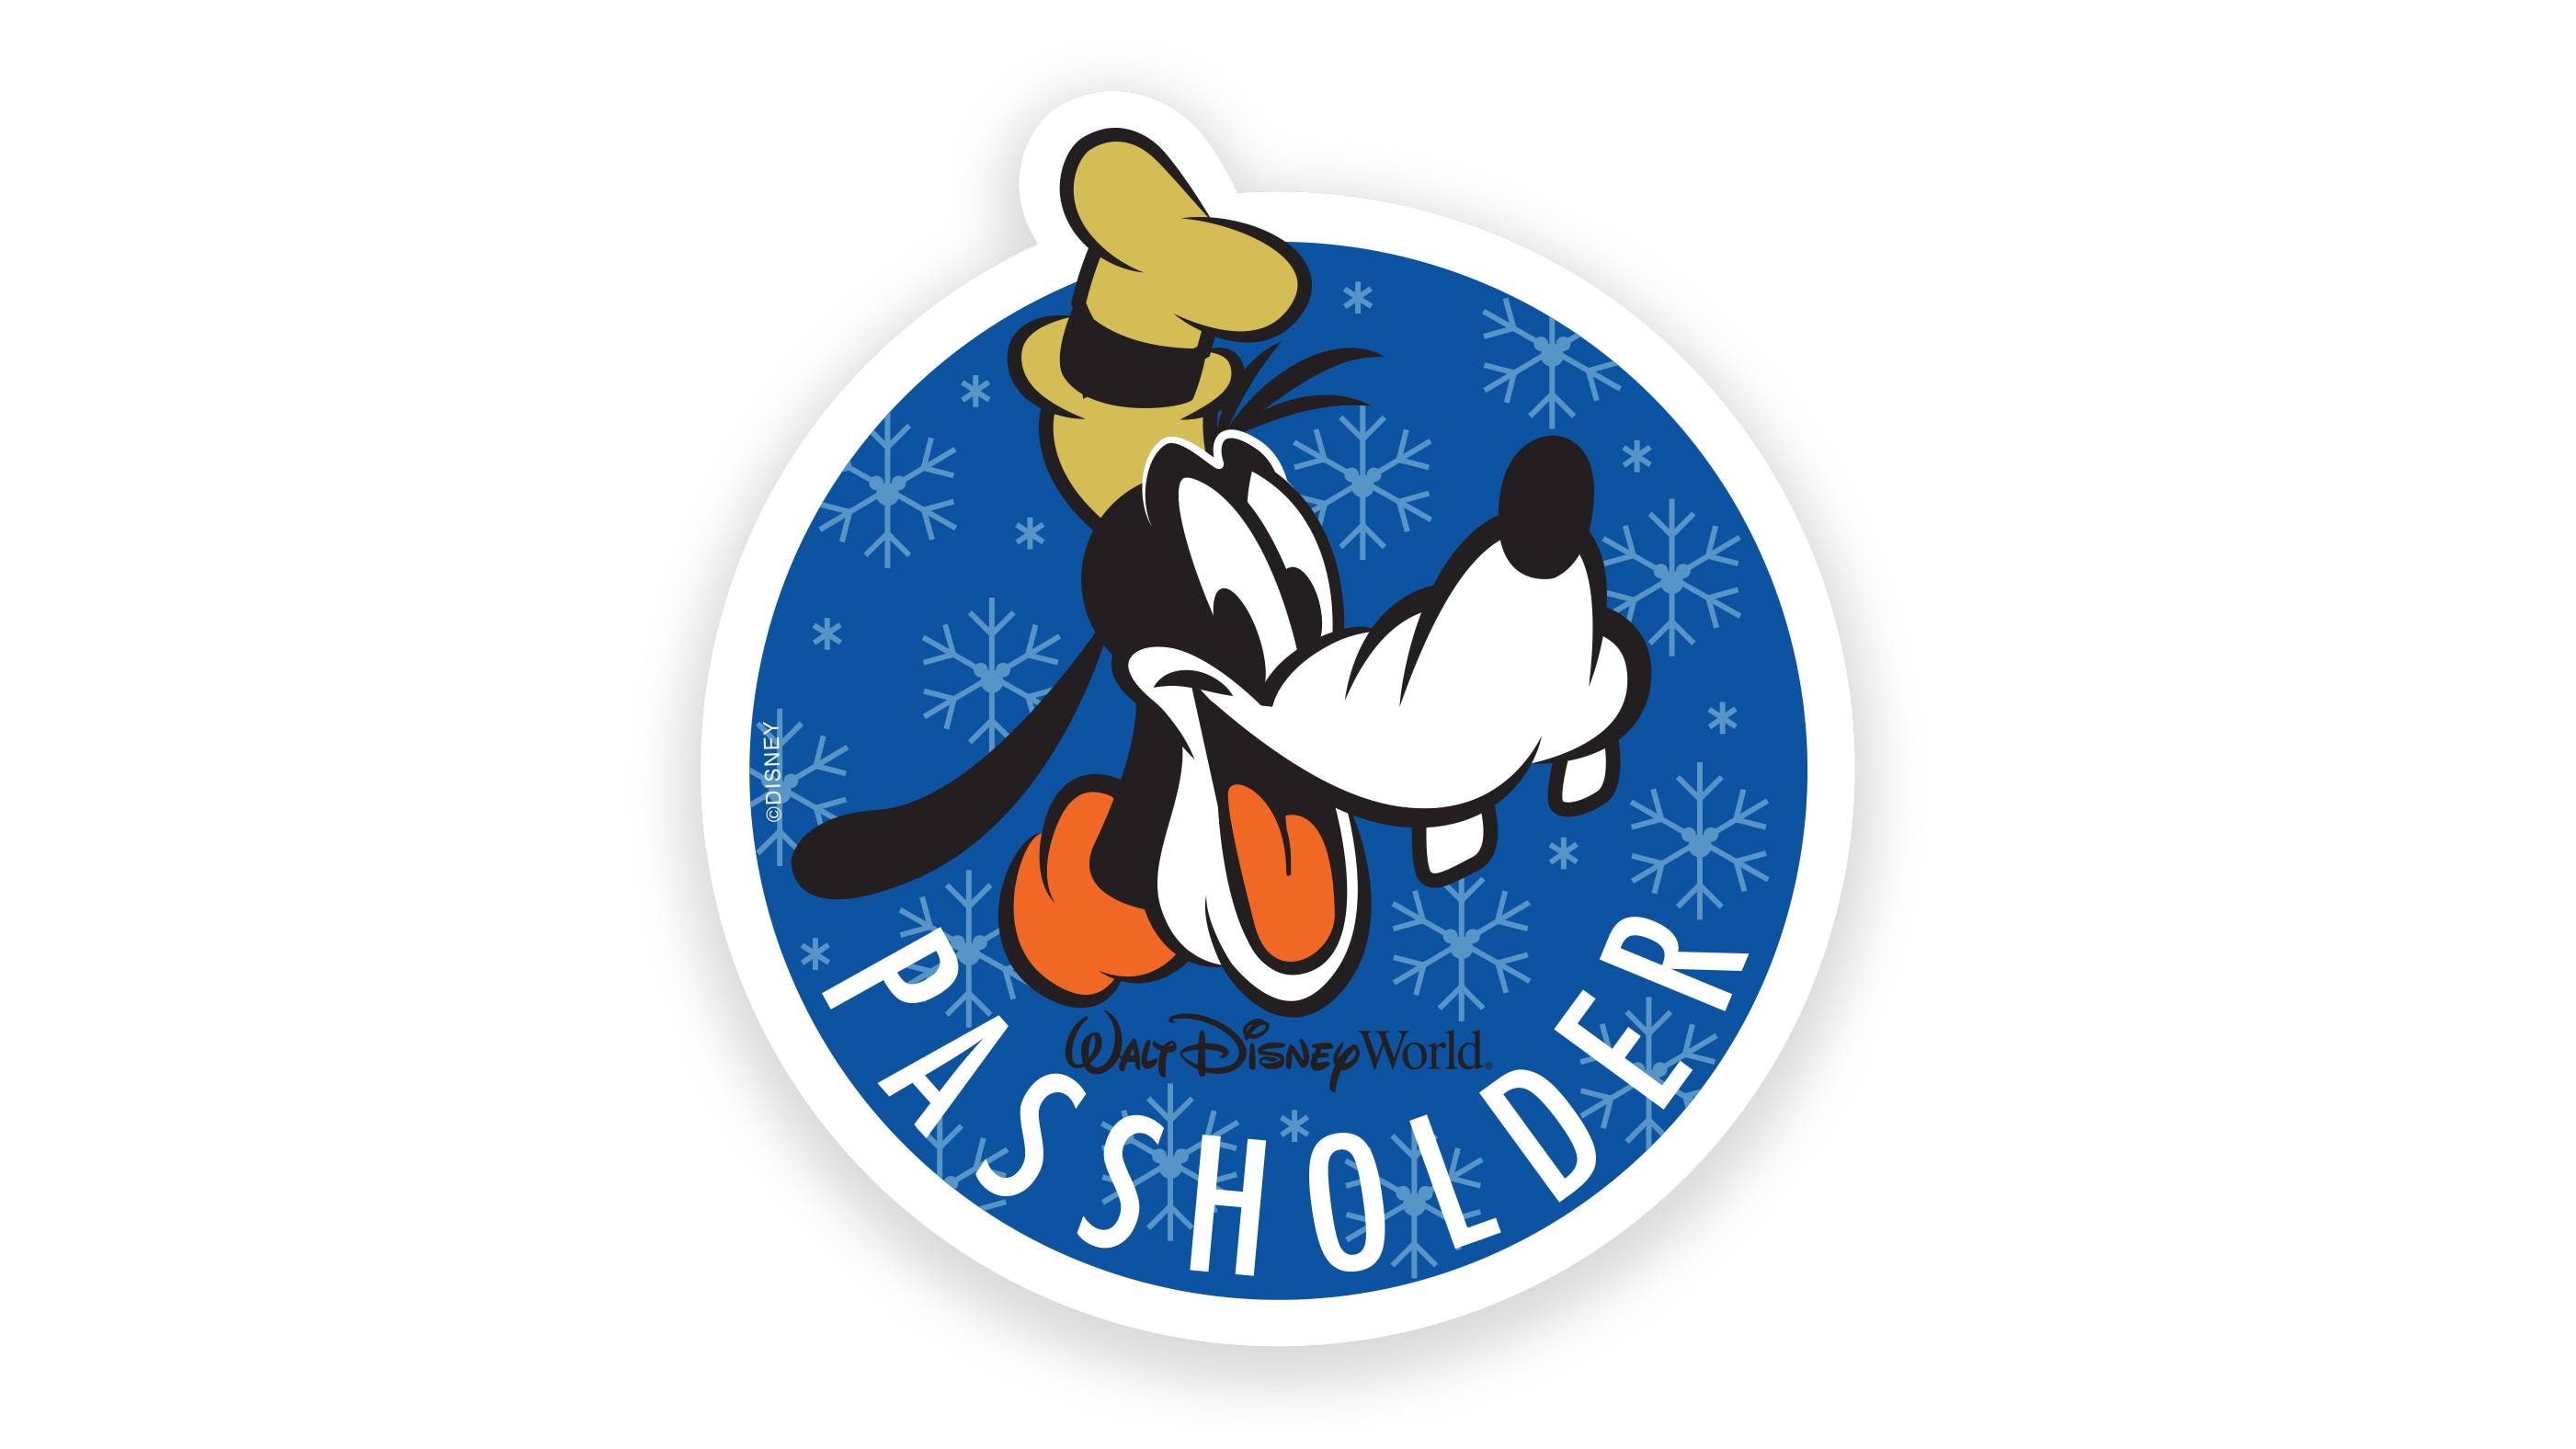 Passholder Magnet for the 2018 Epcot International Festival of the Holidays